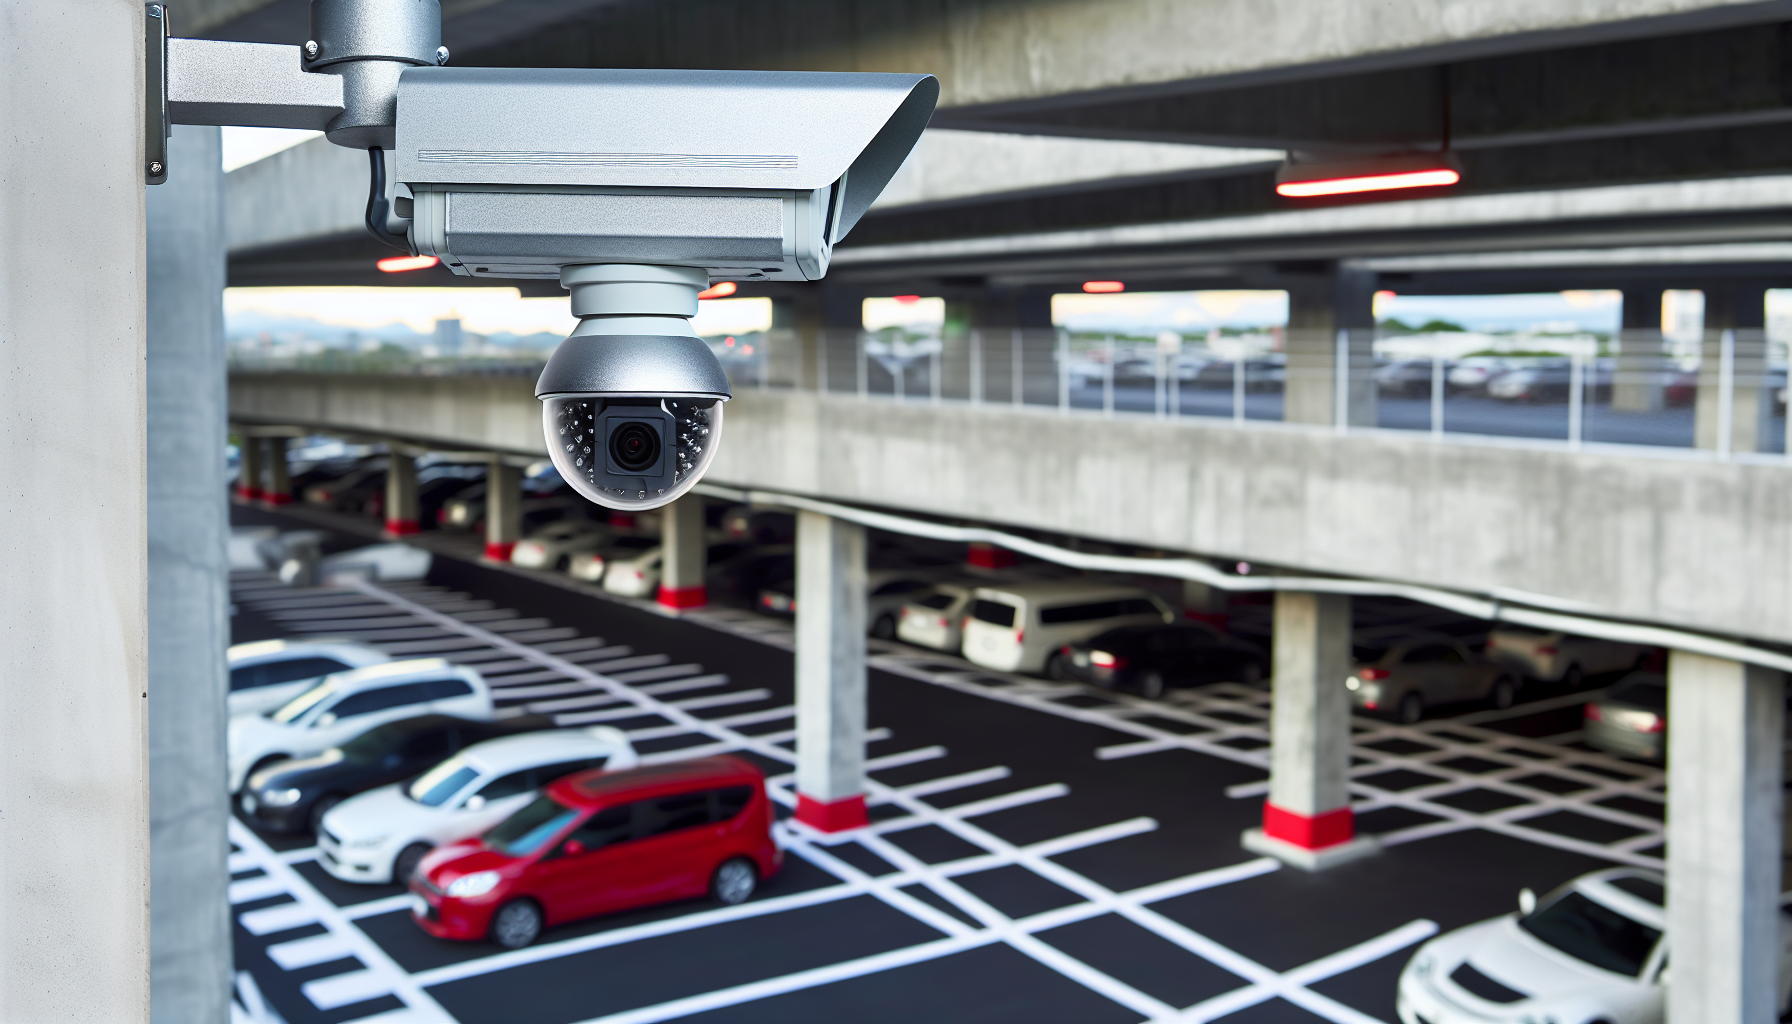 Security camera overlooking a parking facility